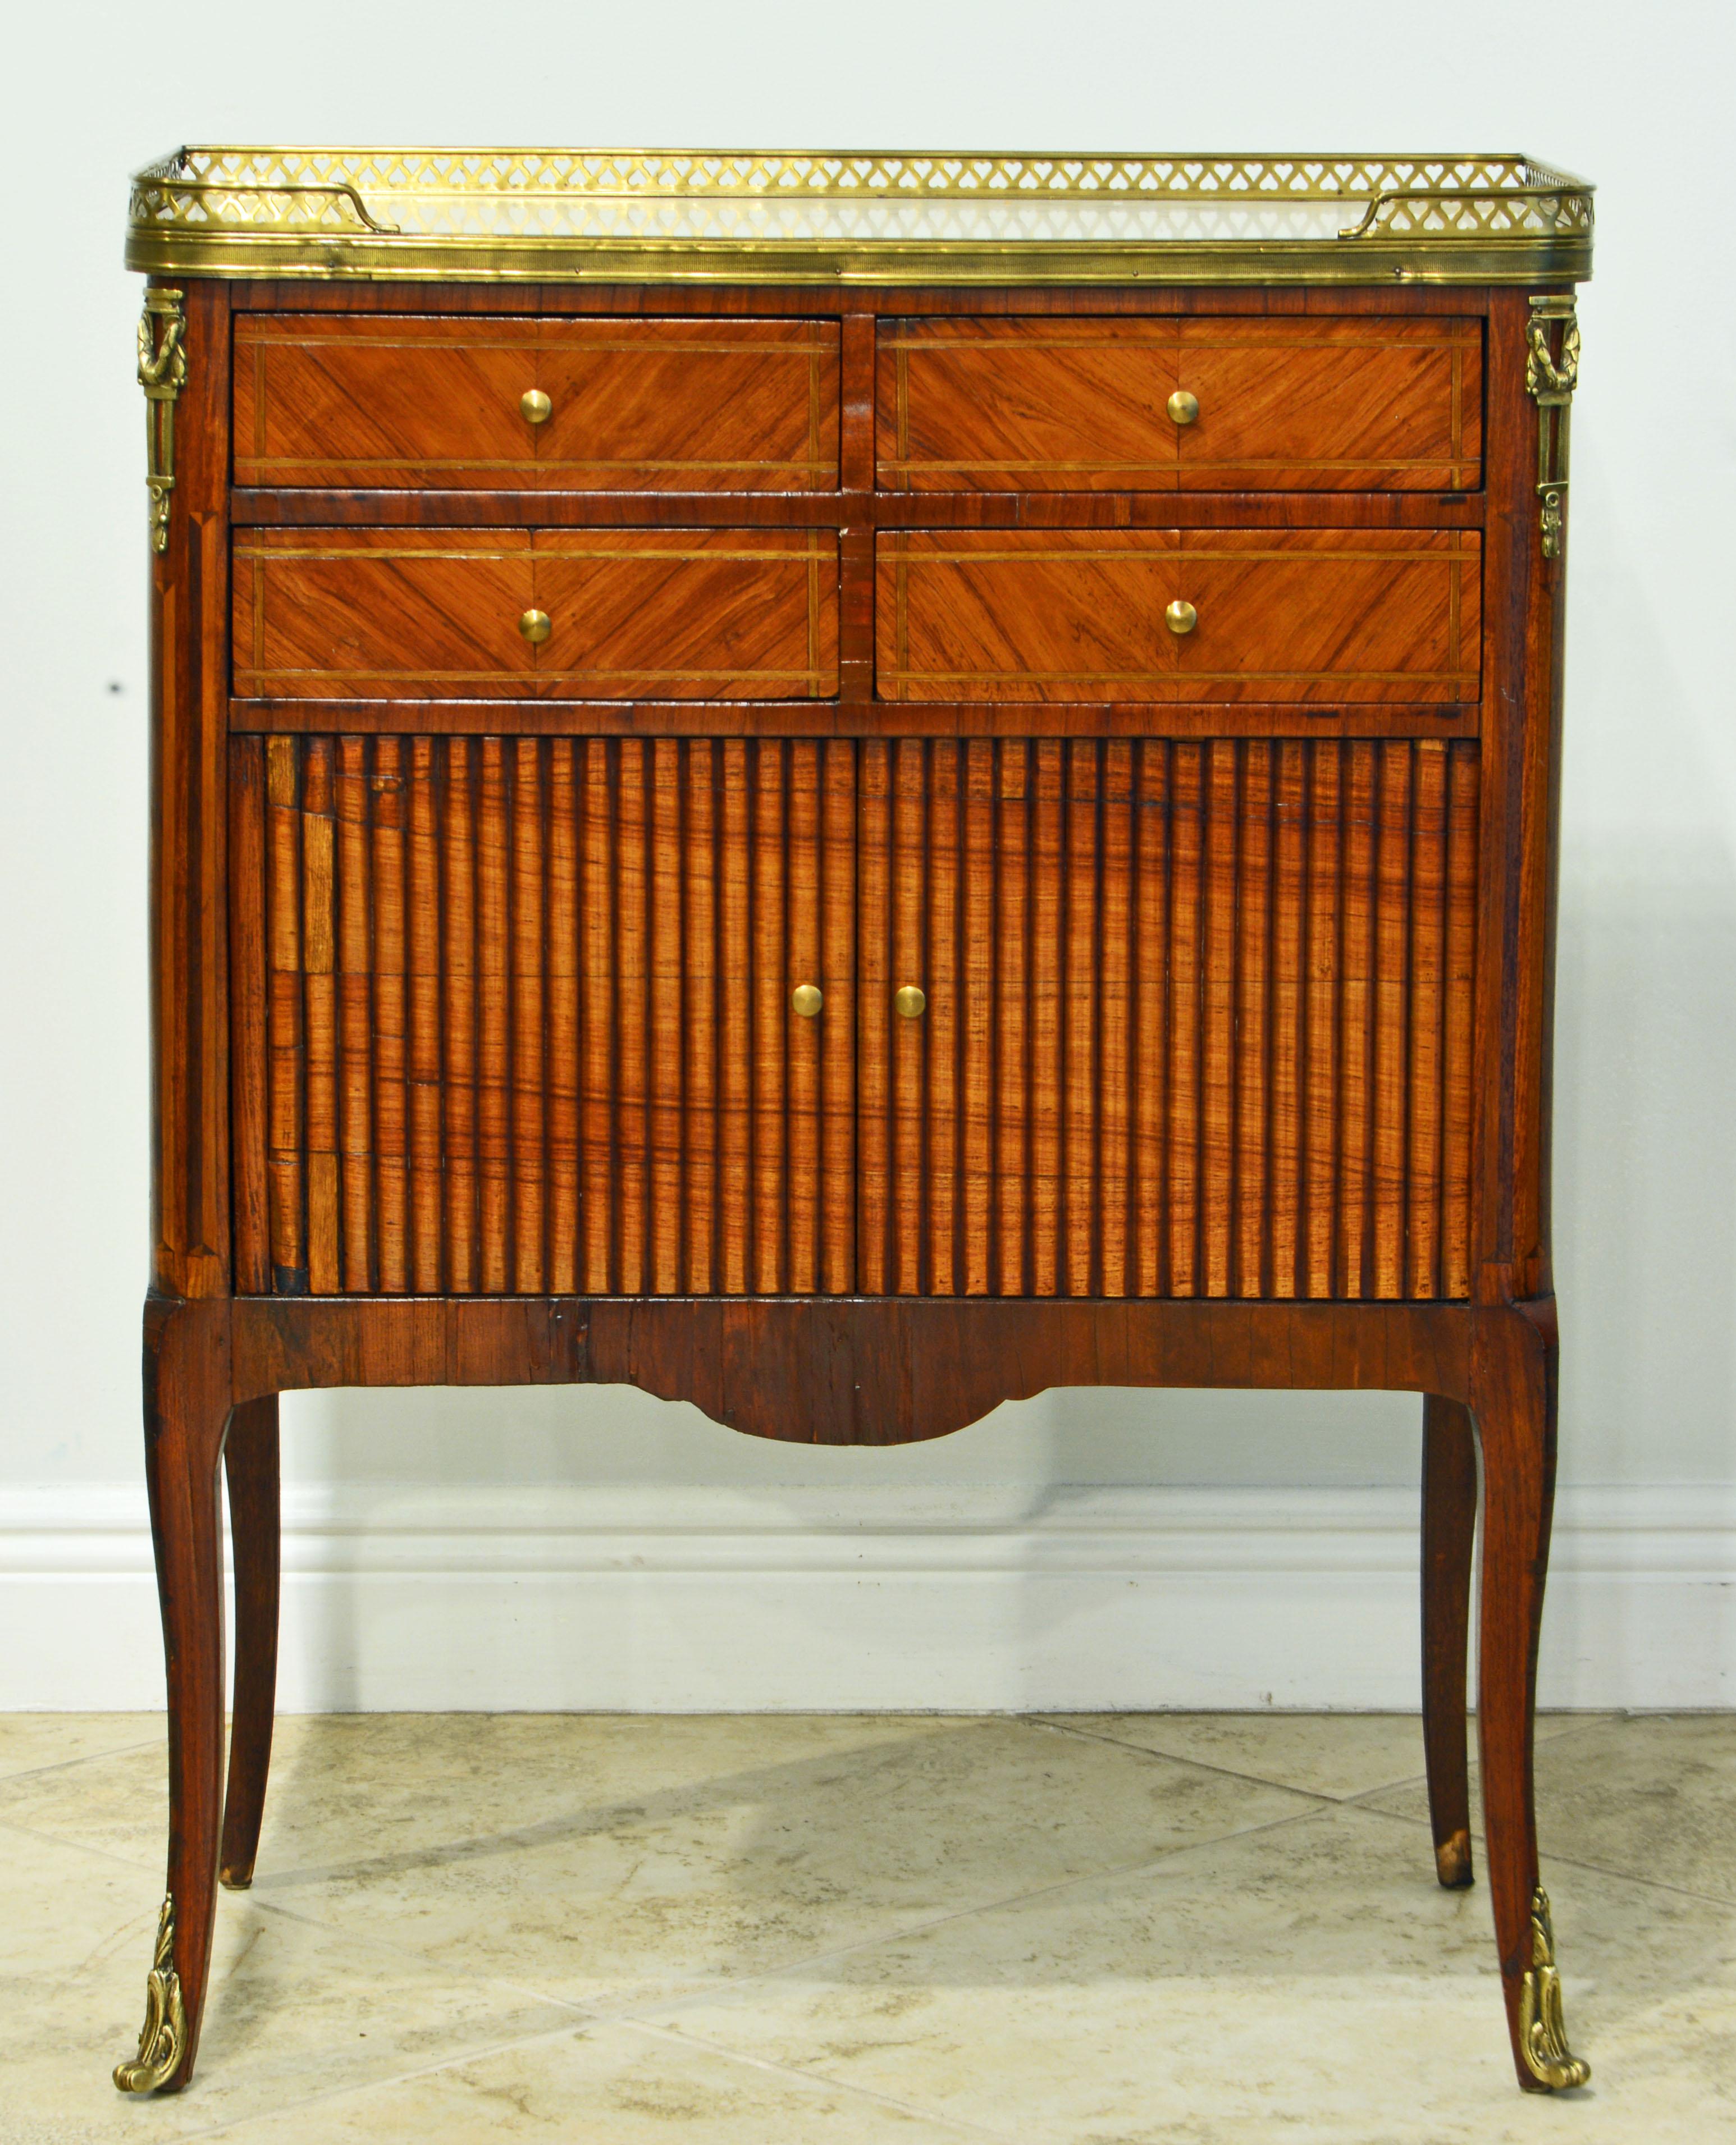 This superior French parquetry commode of beautiful proportions dates to the late 19th century and features a marble top partly surrounded by a reticulated bronze gallery above four drawers and a tambour door cabinet. The corners are accented by